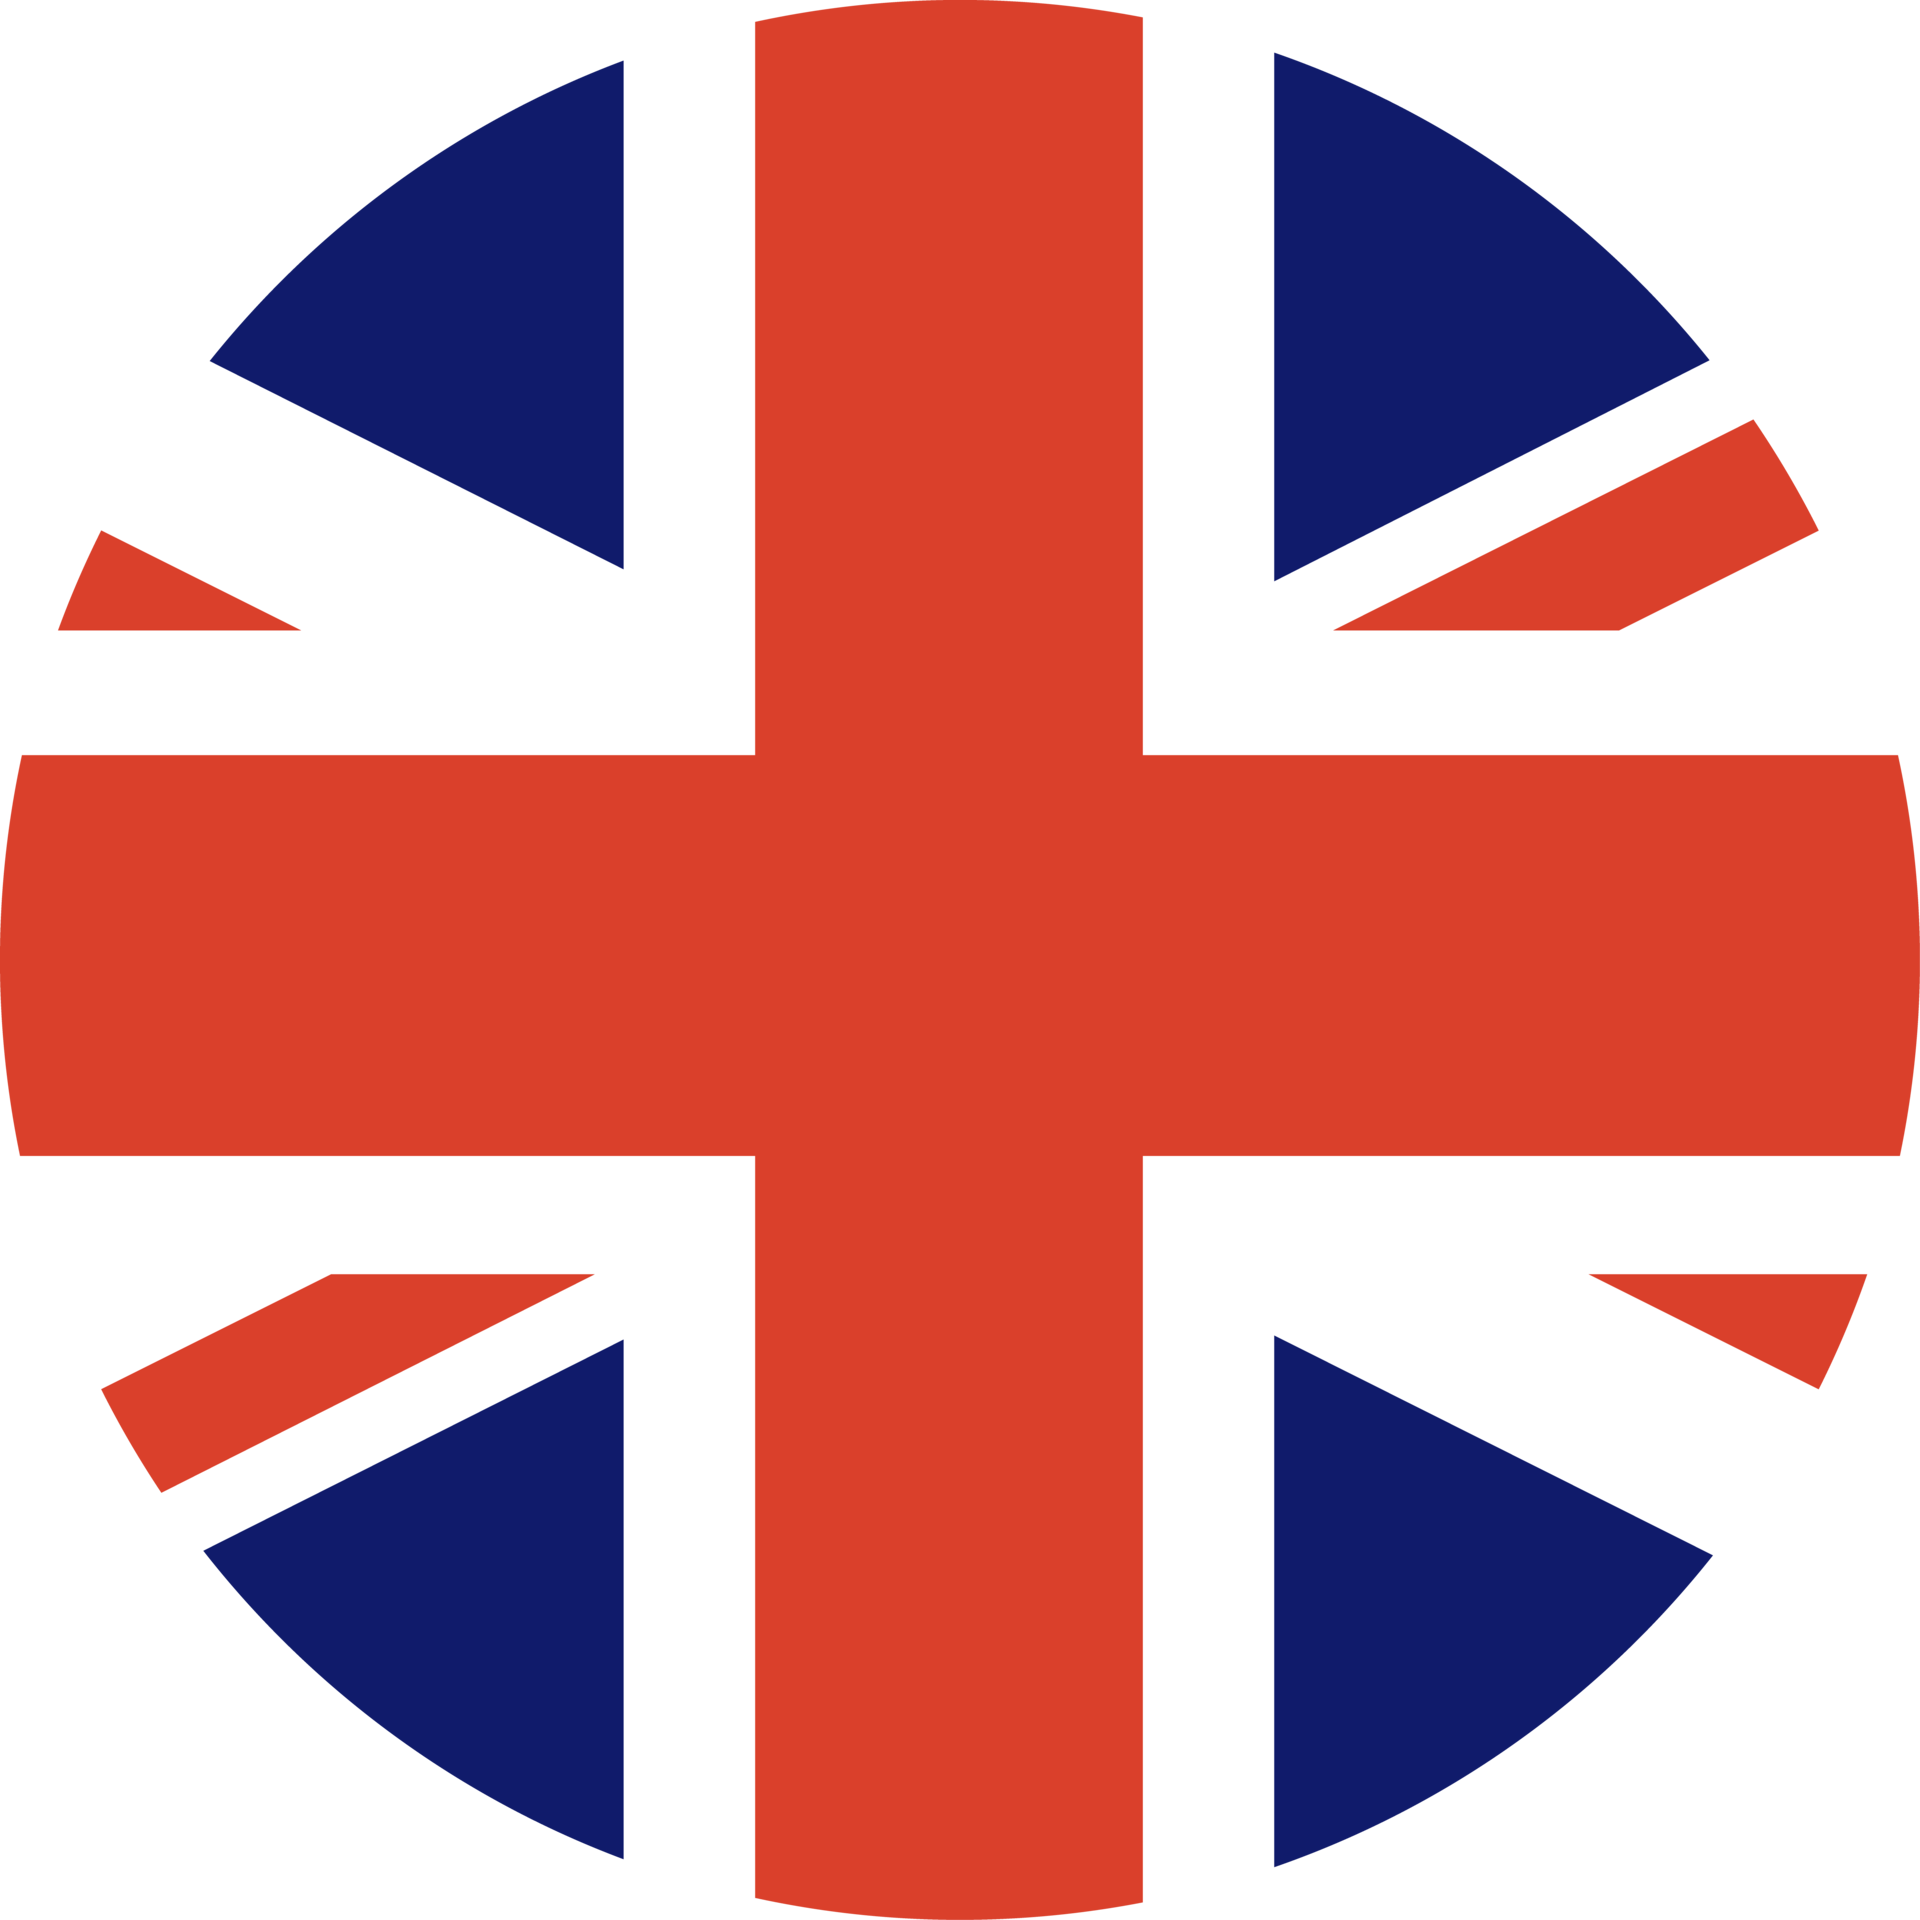 united kingdom flag round icon uk flag symbol official color scheme british flag in circle circular button banner national sign png